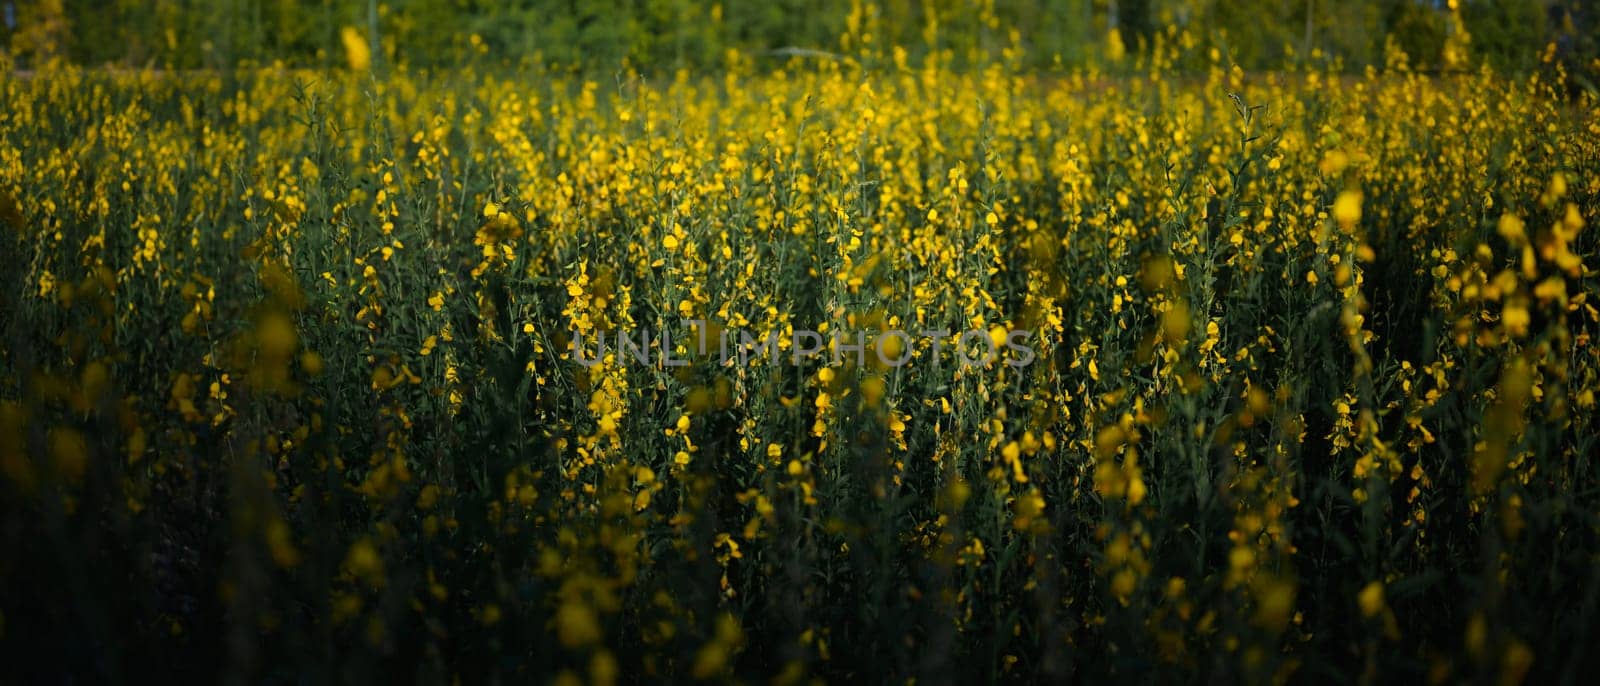 Yellow flowers of Crotalaria juncea (sunn hemp) blooming in fields for soil improvement at sunset by prathanchorruangsak